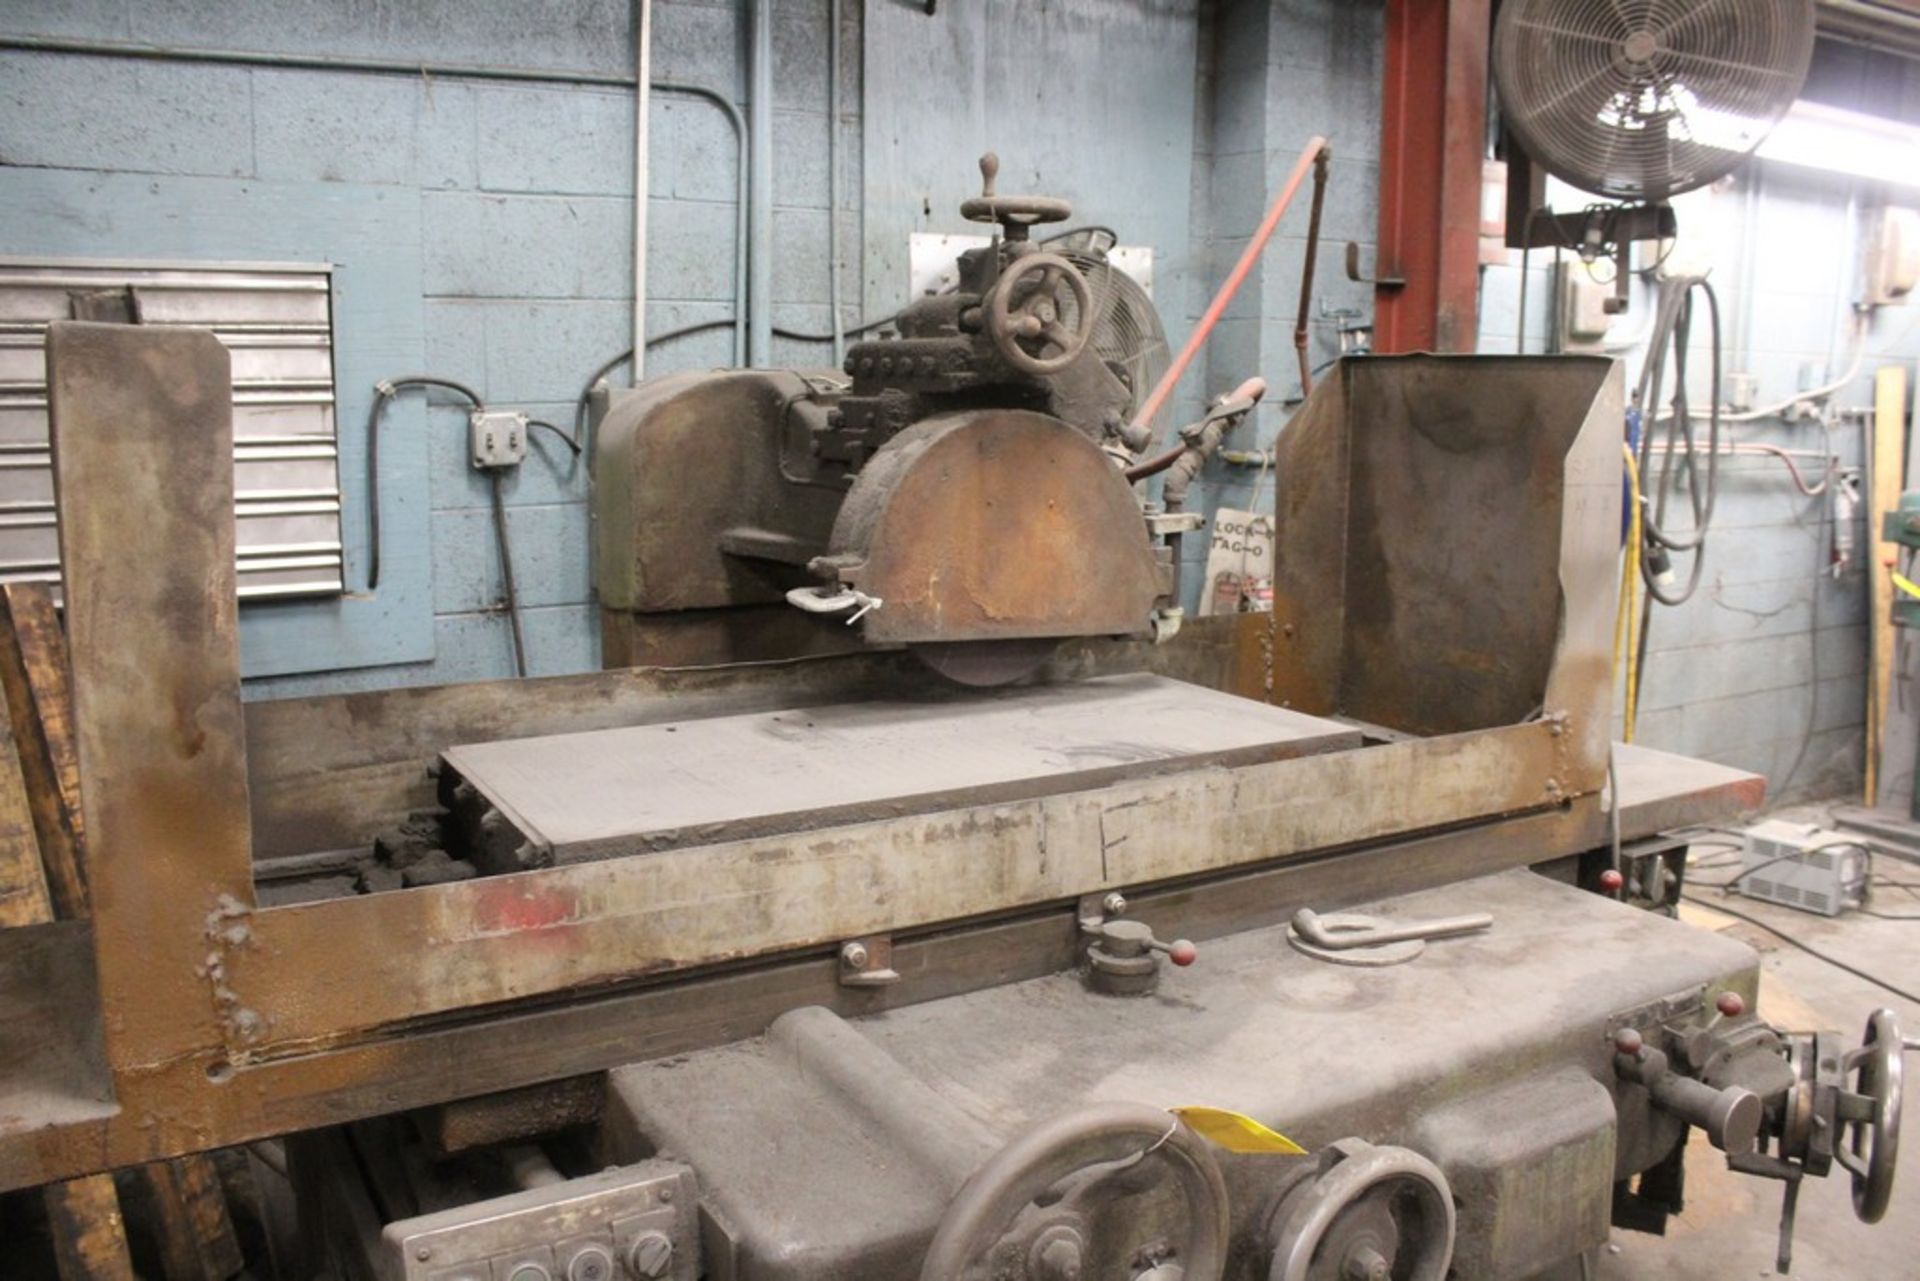 COVEL 16”X36” HYDRAULIC SURFACE GRINDER, S/N 80-224 WITH ELECTRO MAGNETIC CHUCK Loading Fee: $400 - Image 2 of 6